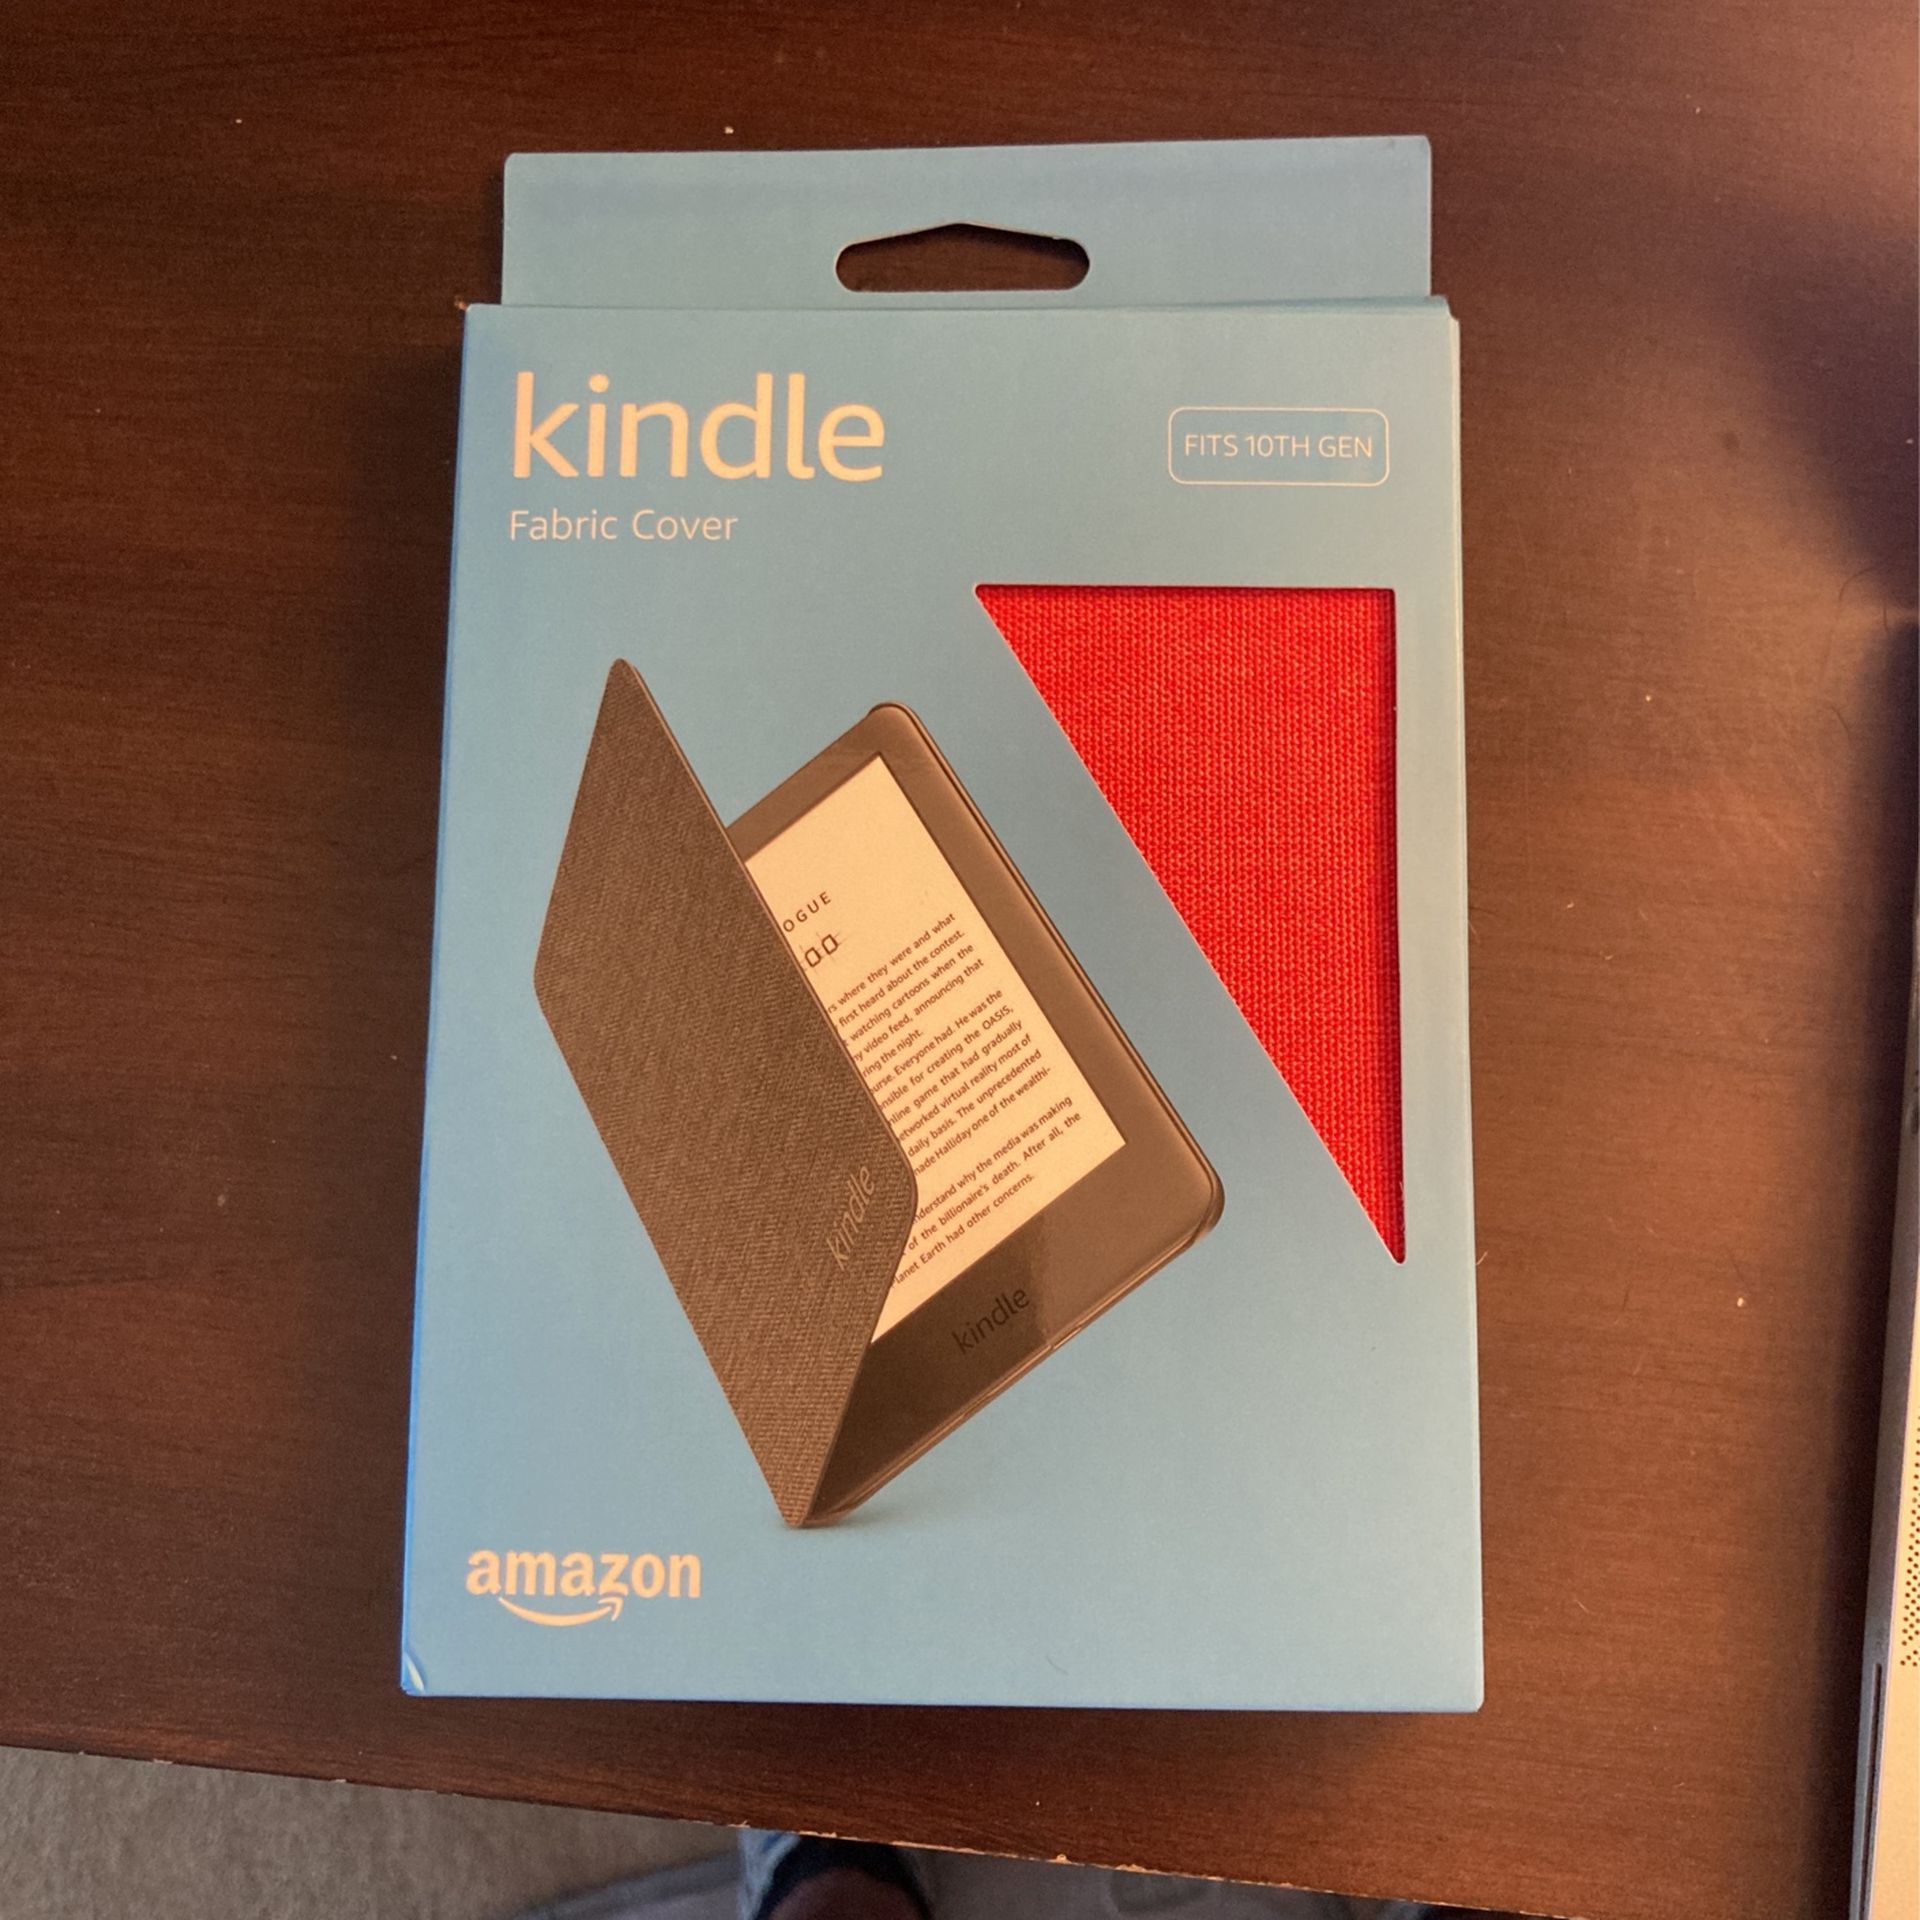 Amazon - Kindle Fabric Cover (Fits 10th Generation)